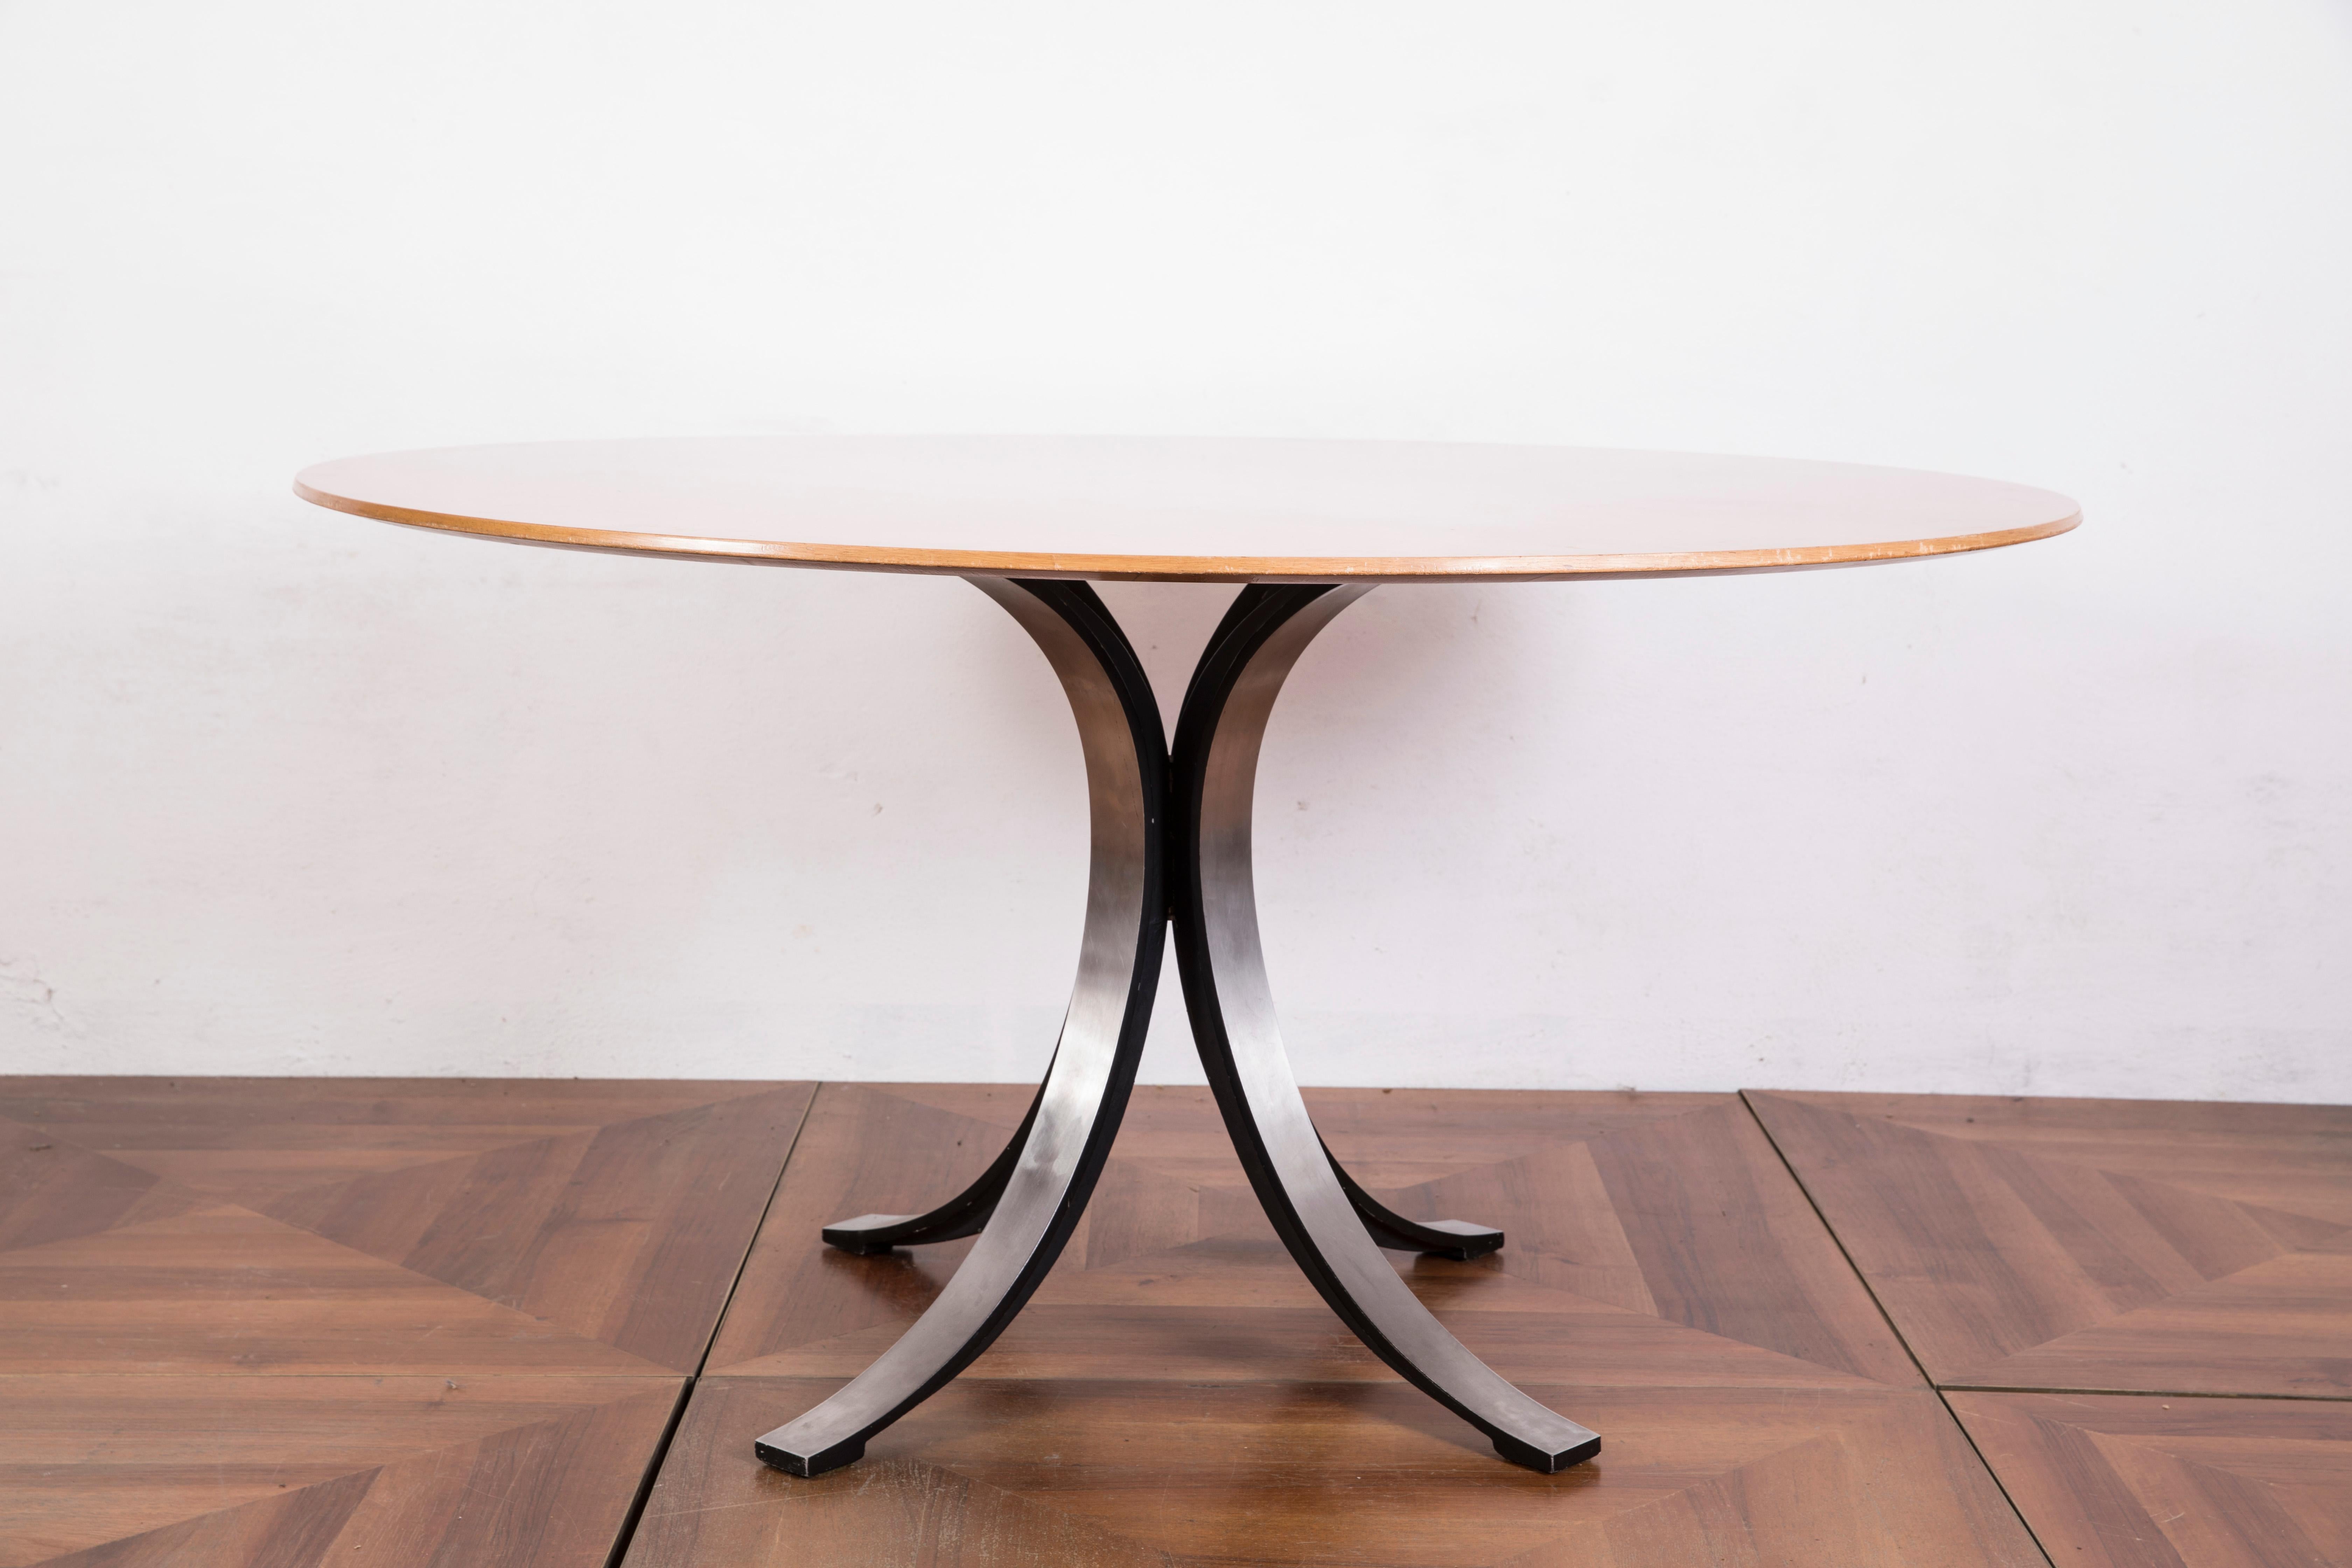 Osvaldo Borsani and Eugenio Gerli for Tecno, T-69 Dining table, rosewood, steel, Italy, 1965.

Round dining table with rosewood top and steel base. Characteristic on this table is the base. Consisting of four C-shaped legs. These semicircles